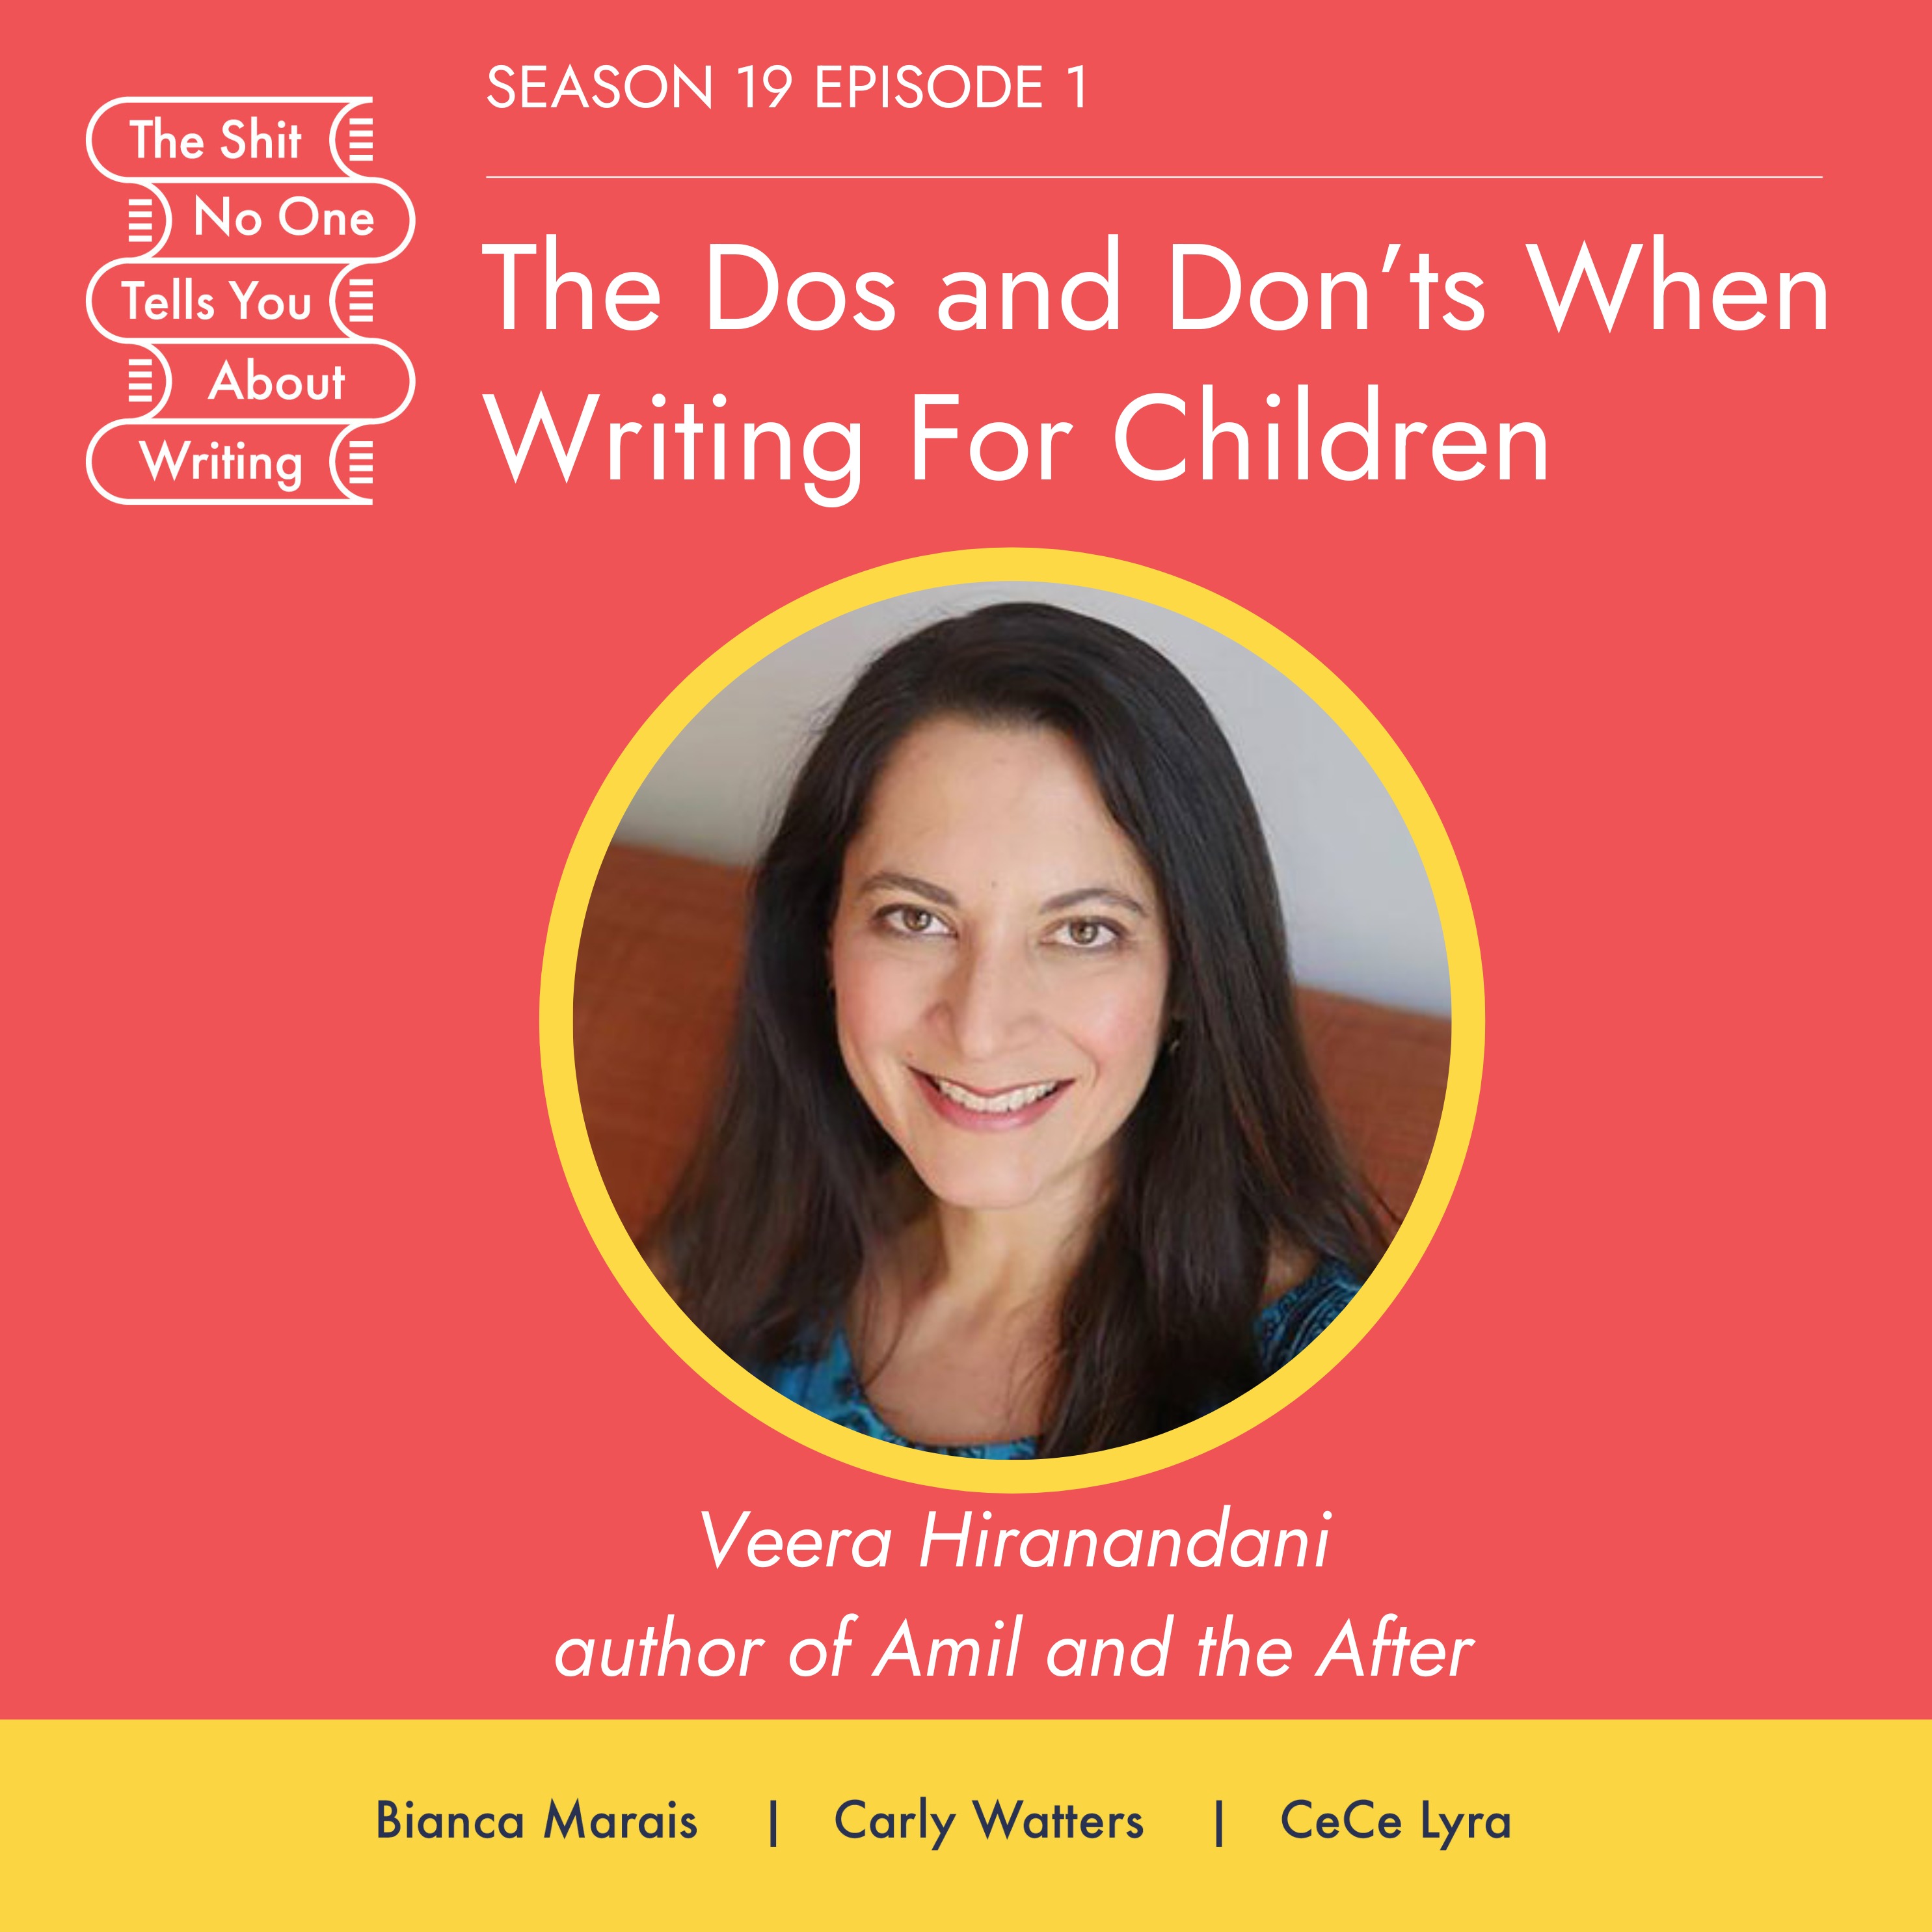 The Dos and Don’ts When Writing For Children